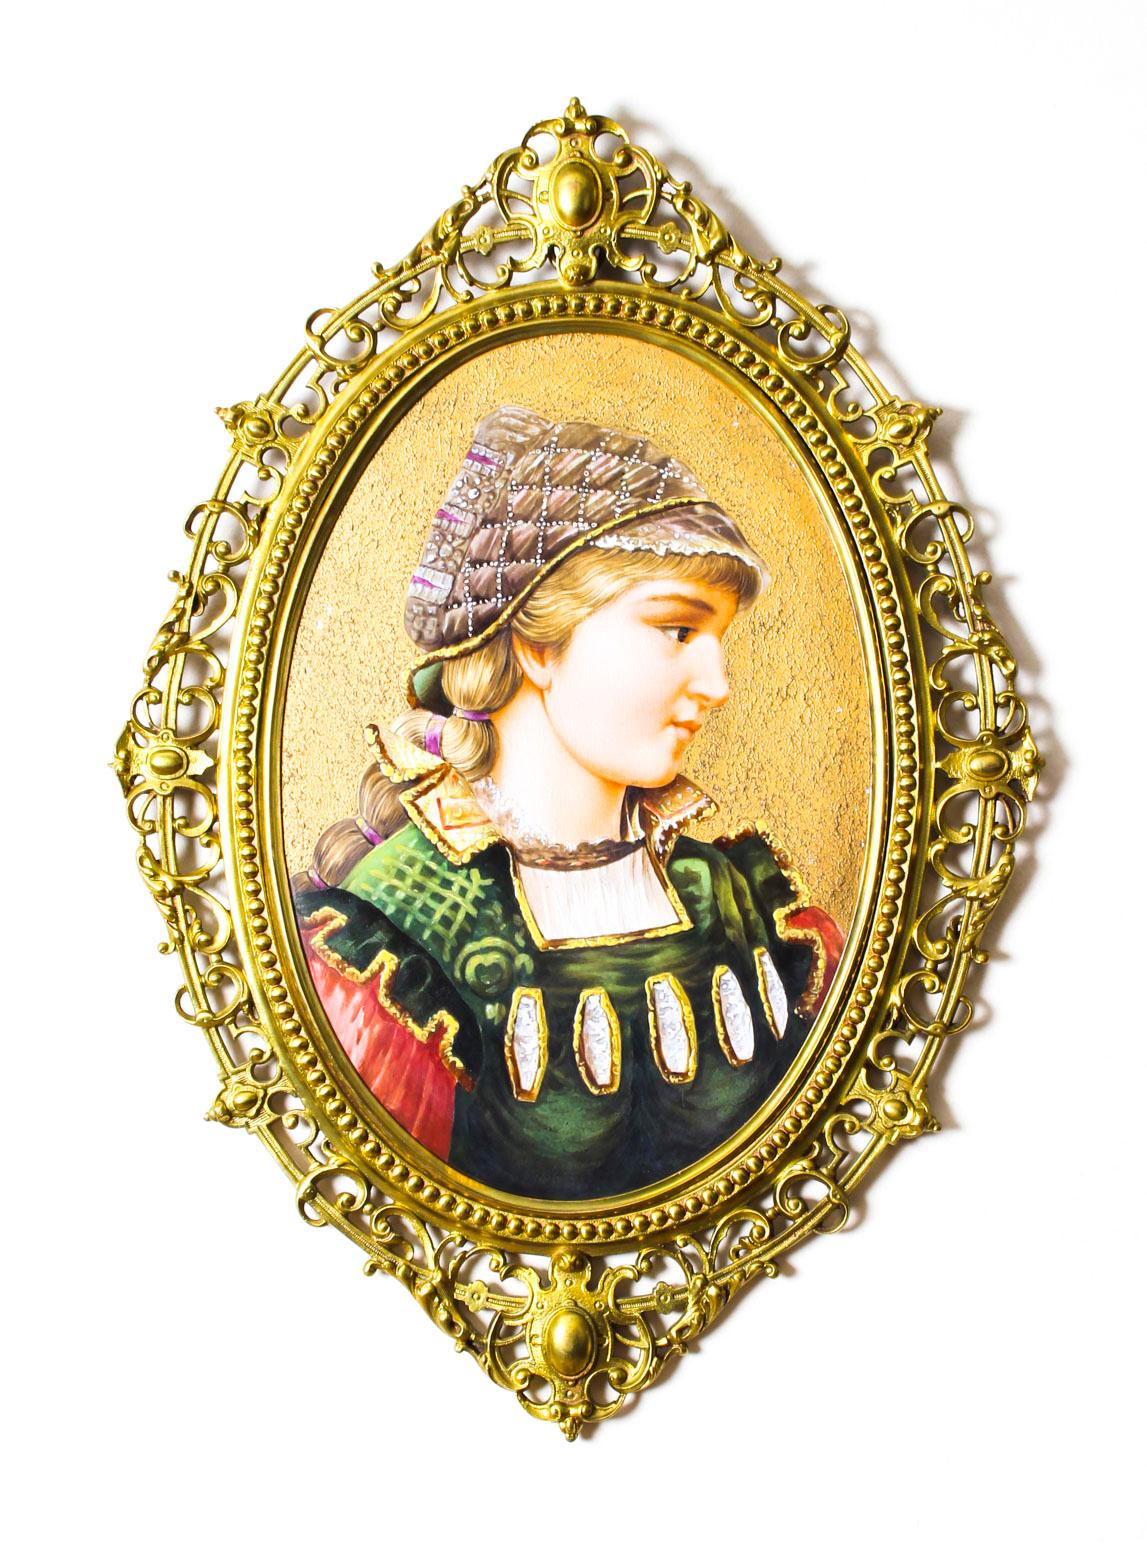 Antique Berlin Oval Porcelain Plaque Young Woman Ormolu Frame, 19th Century For Sale 1